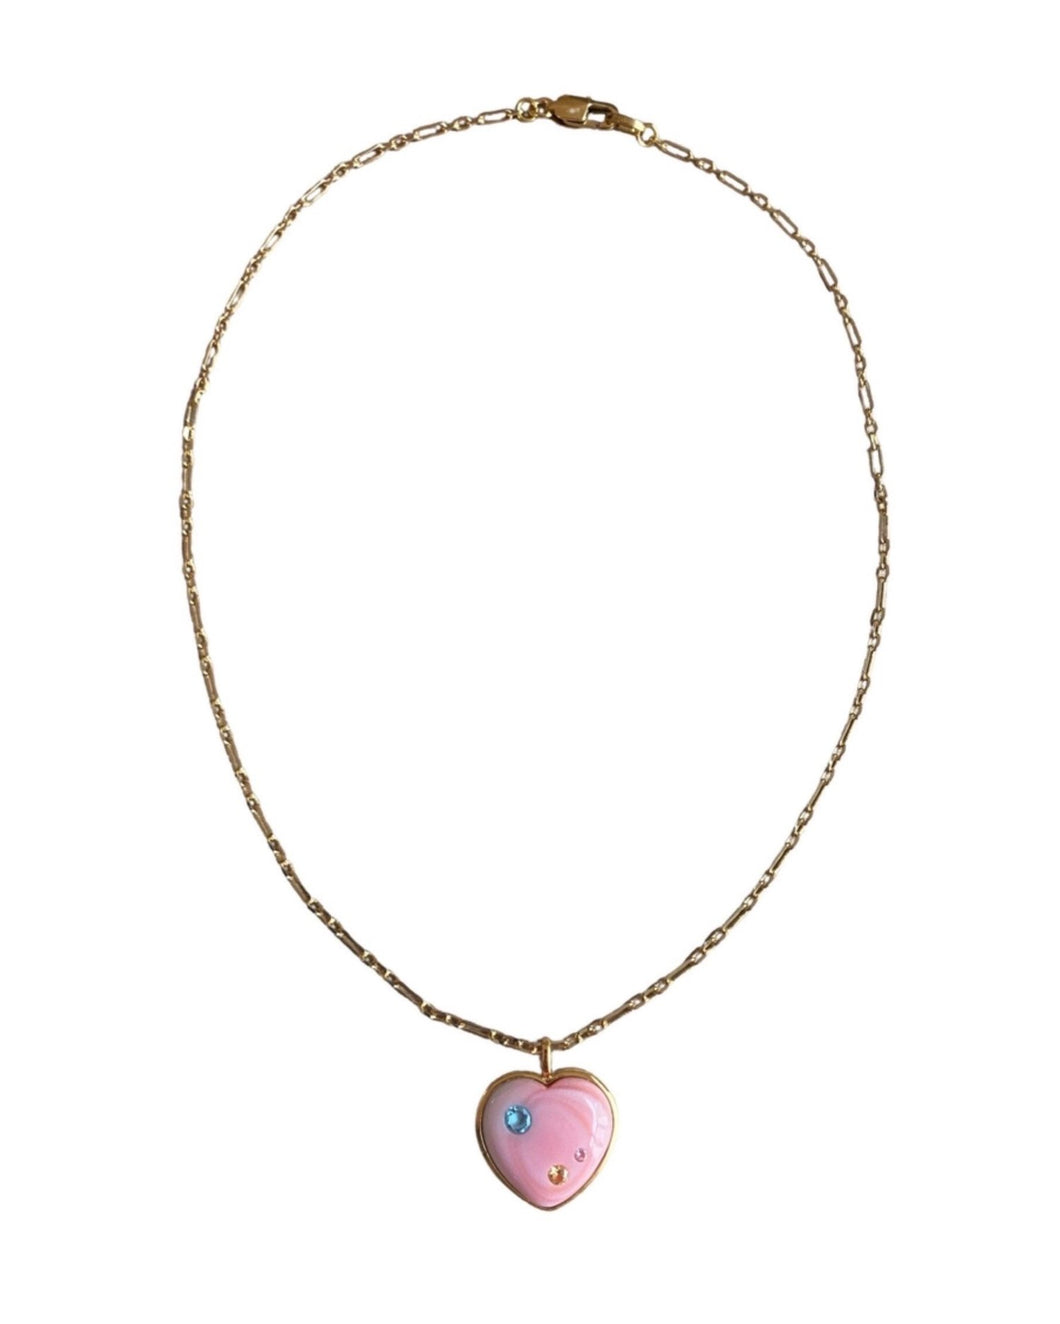 Cotton Candy Heart to Heart Necklace